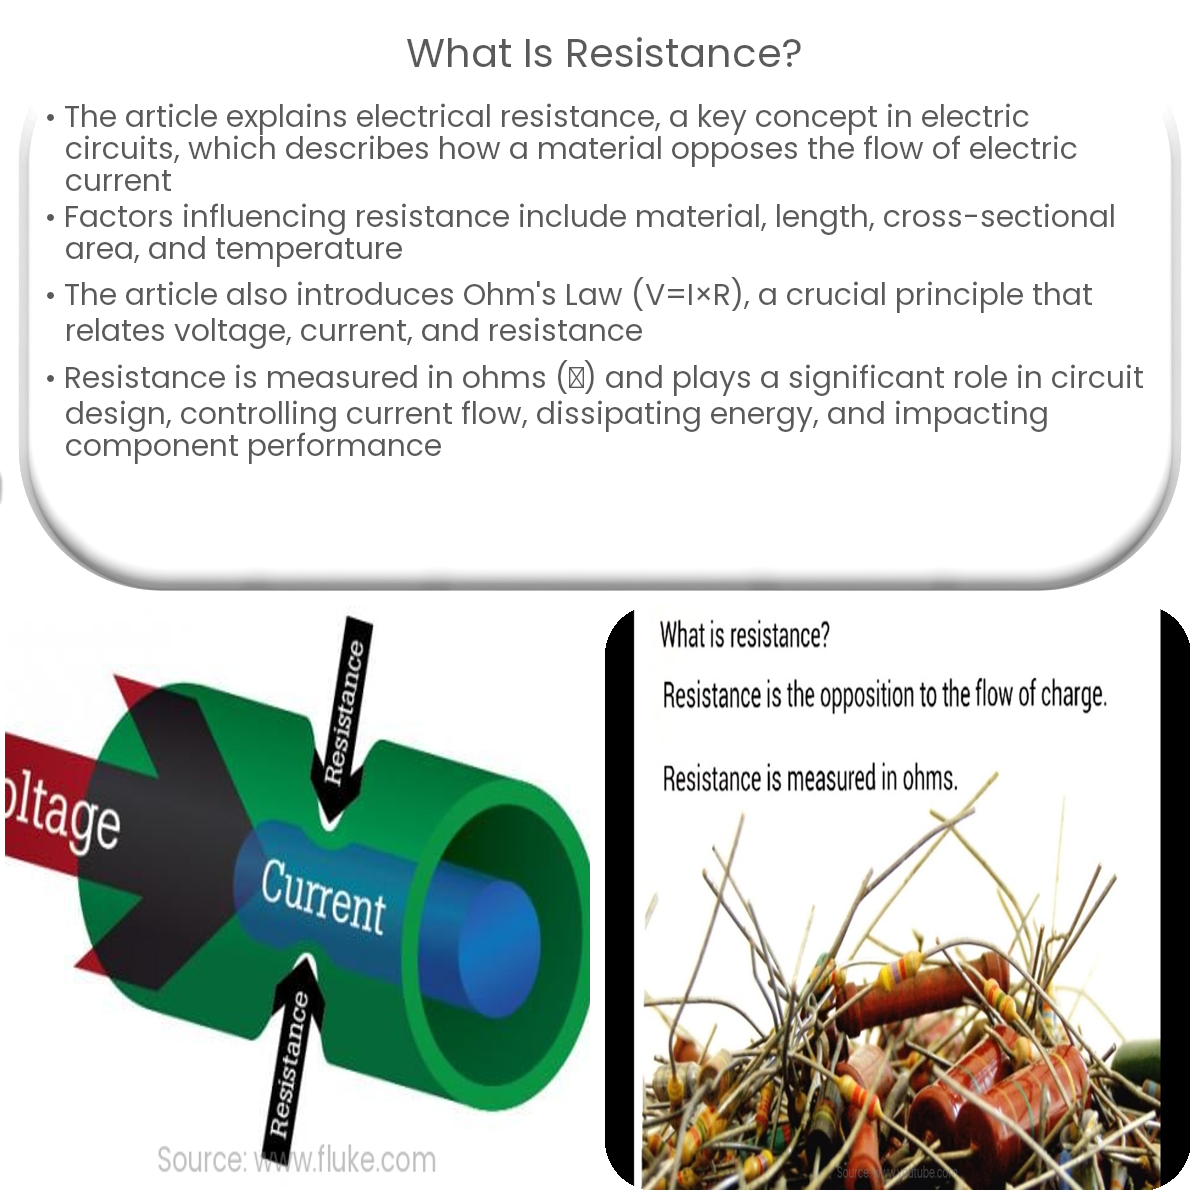 What is resistance?